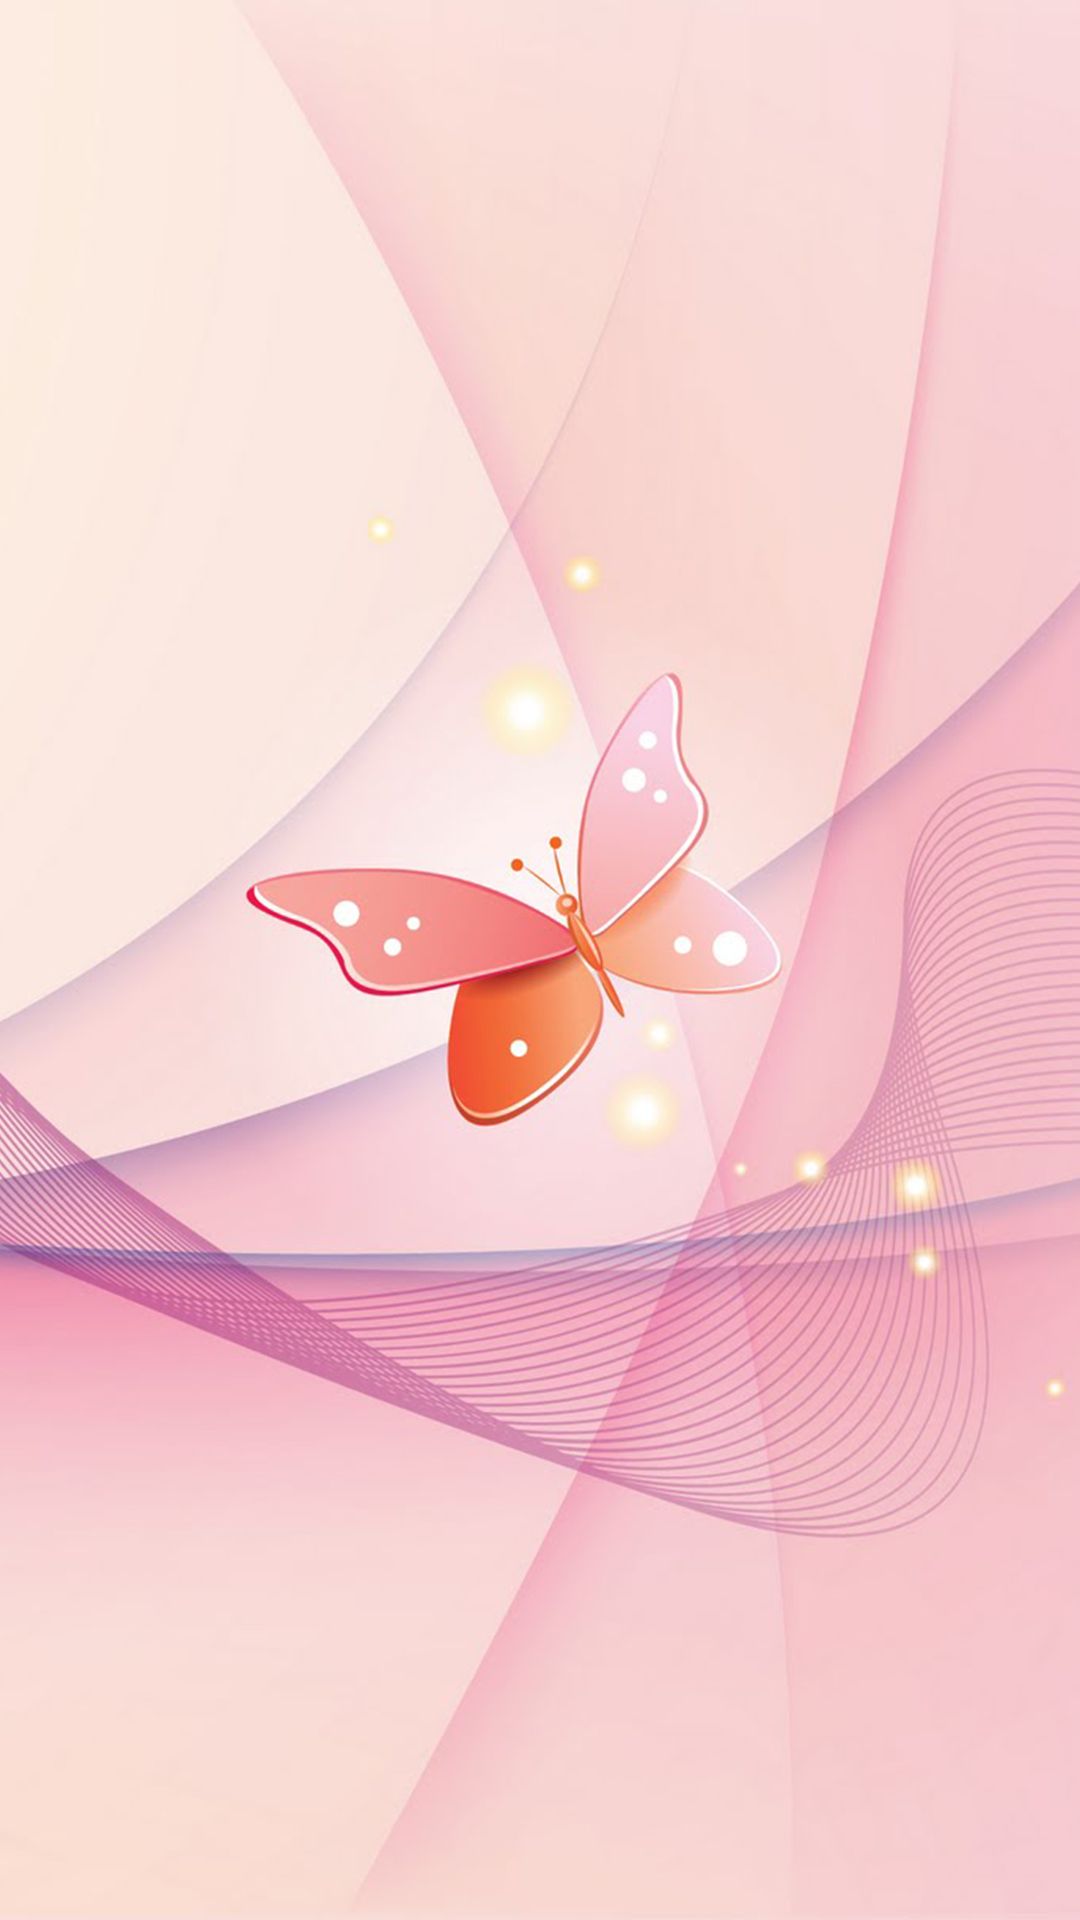 Butterfly Wallpaper For Android